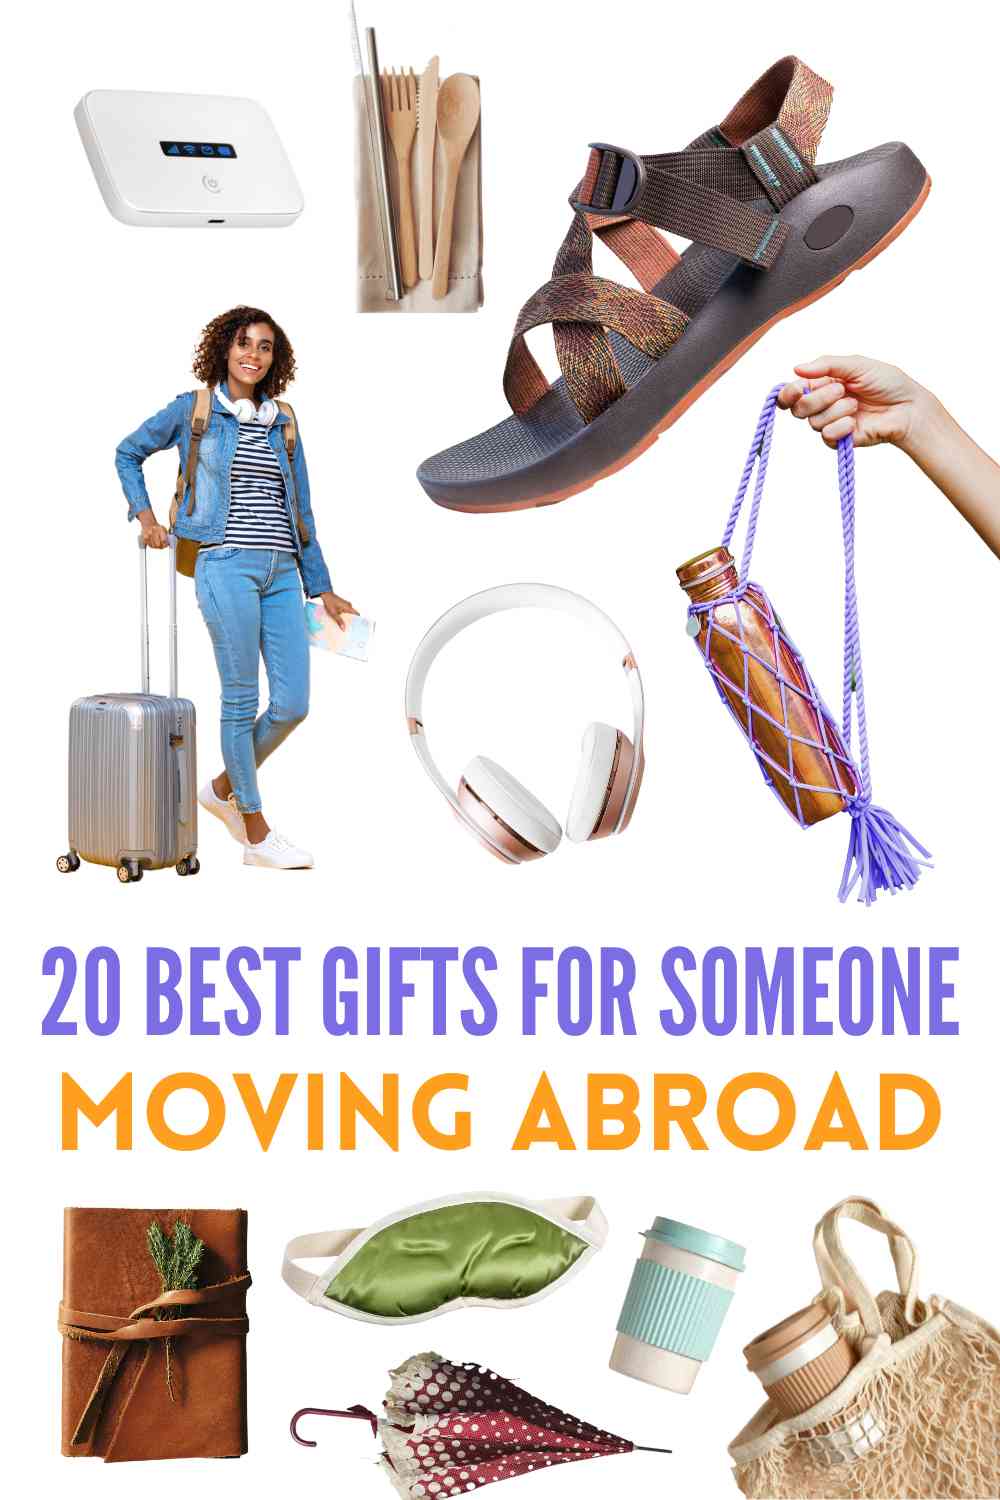 Gifts for someone going abroad